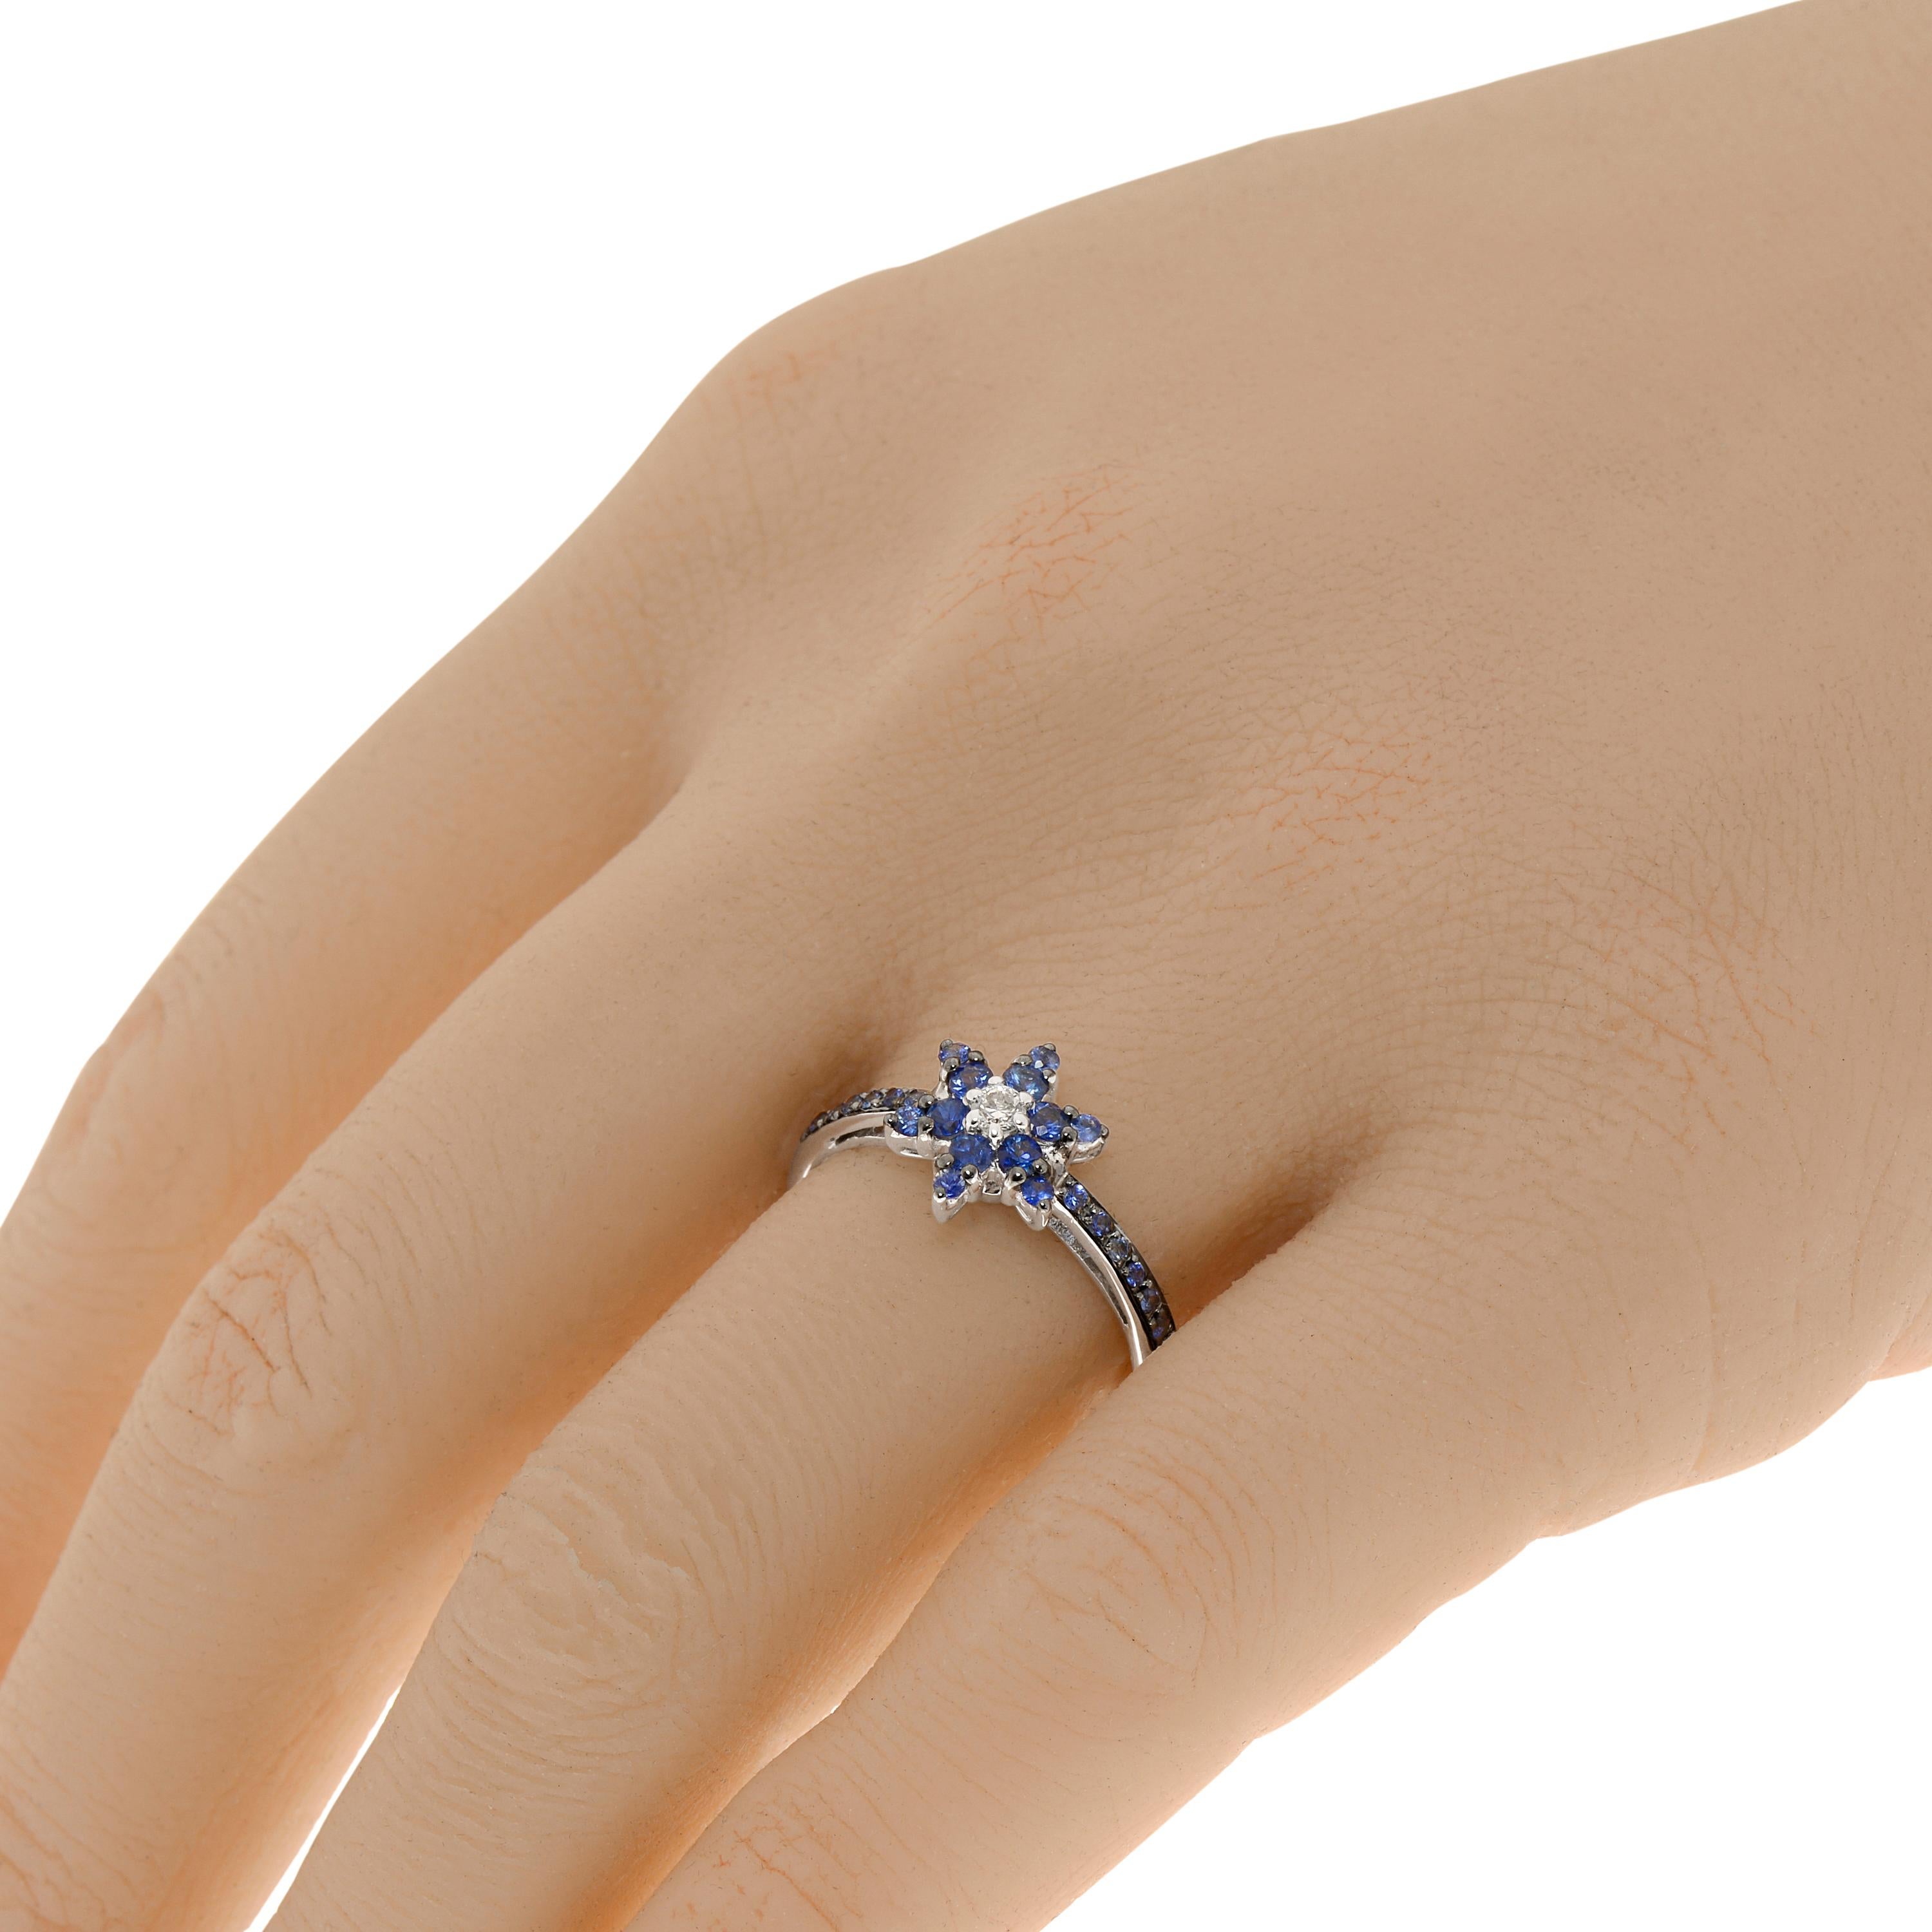 Zydo 18K White Gold Band Ring features a flower clustered with 0.42ct. tw. blue sapphire gemstones and 0.05ct. tw. diamond accents. The ring size is 7 (54.4). The decoration size is 3/8